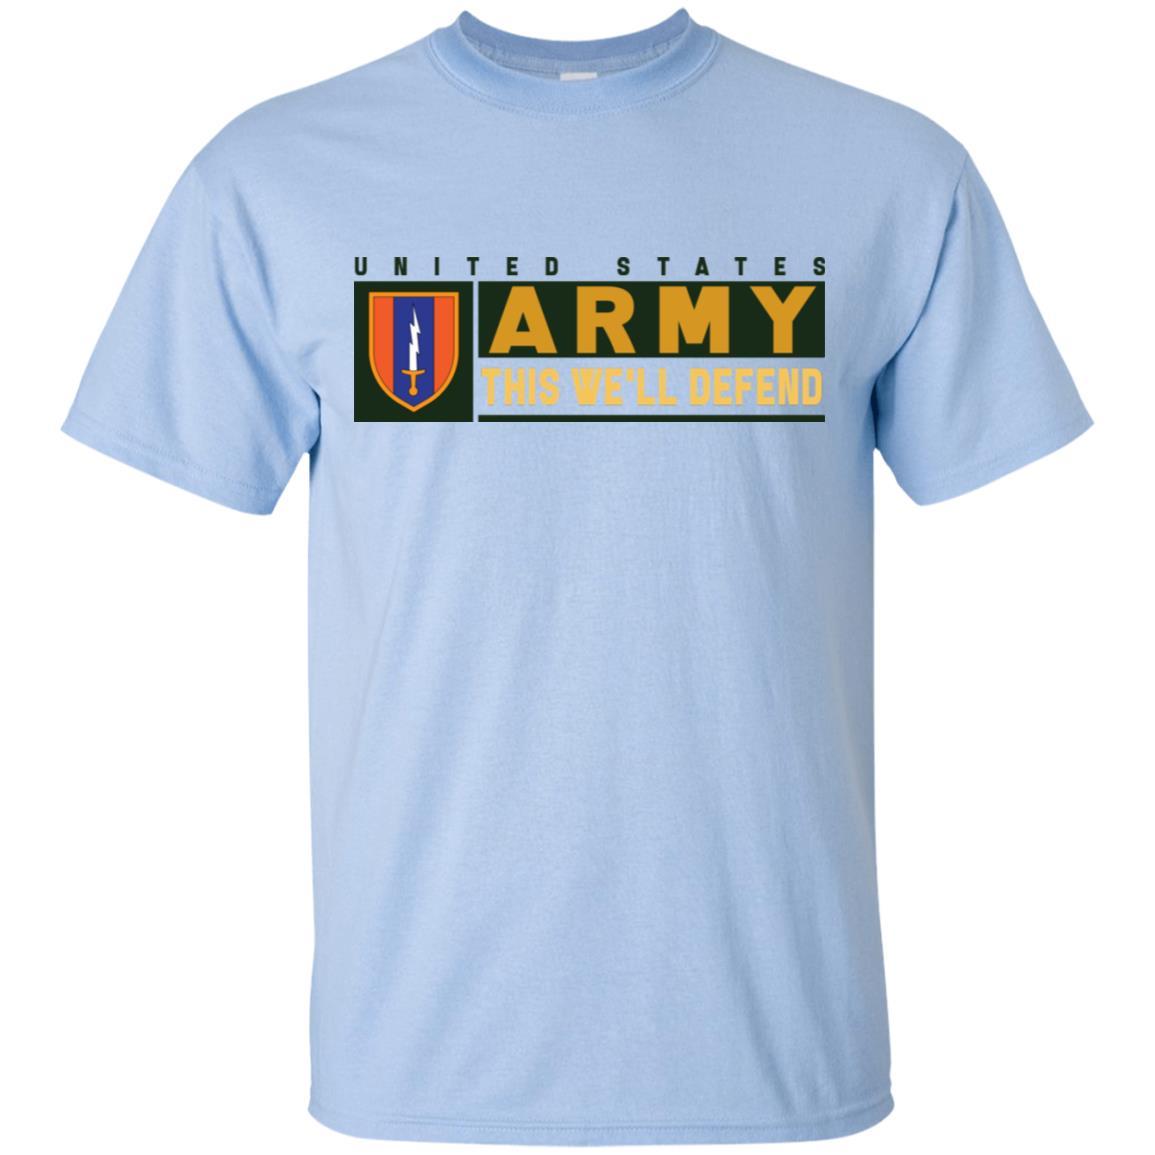 US Army 1ST SIGNAL- This We'll Defend T-Shirt On Front For Men-TShirt-Army-Veterans Nation